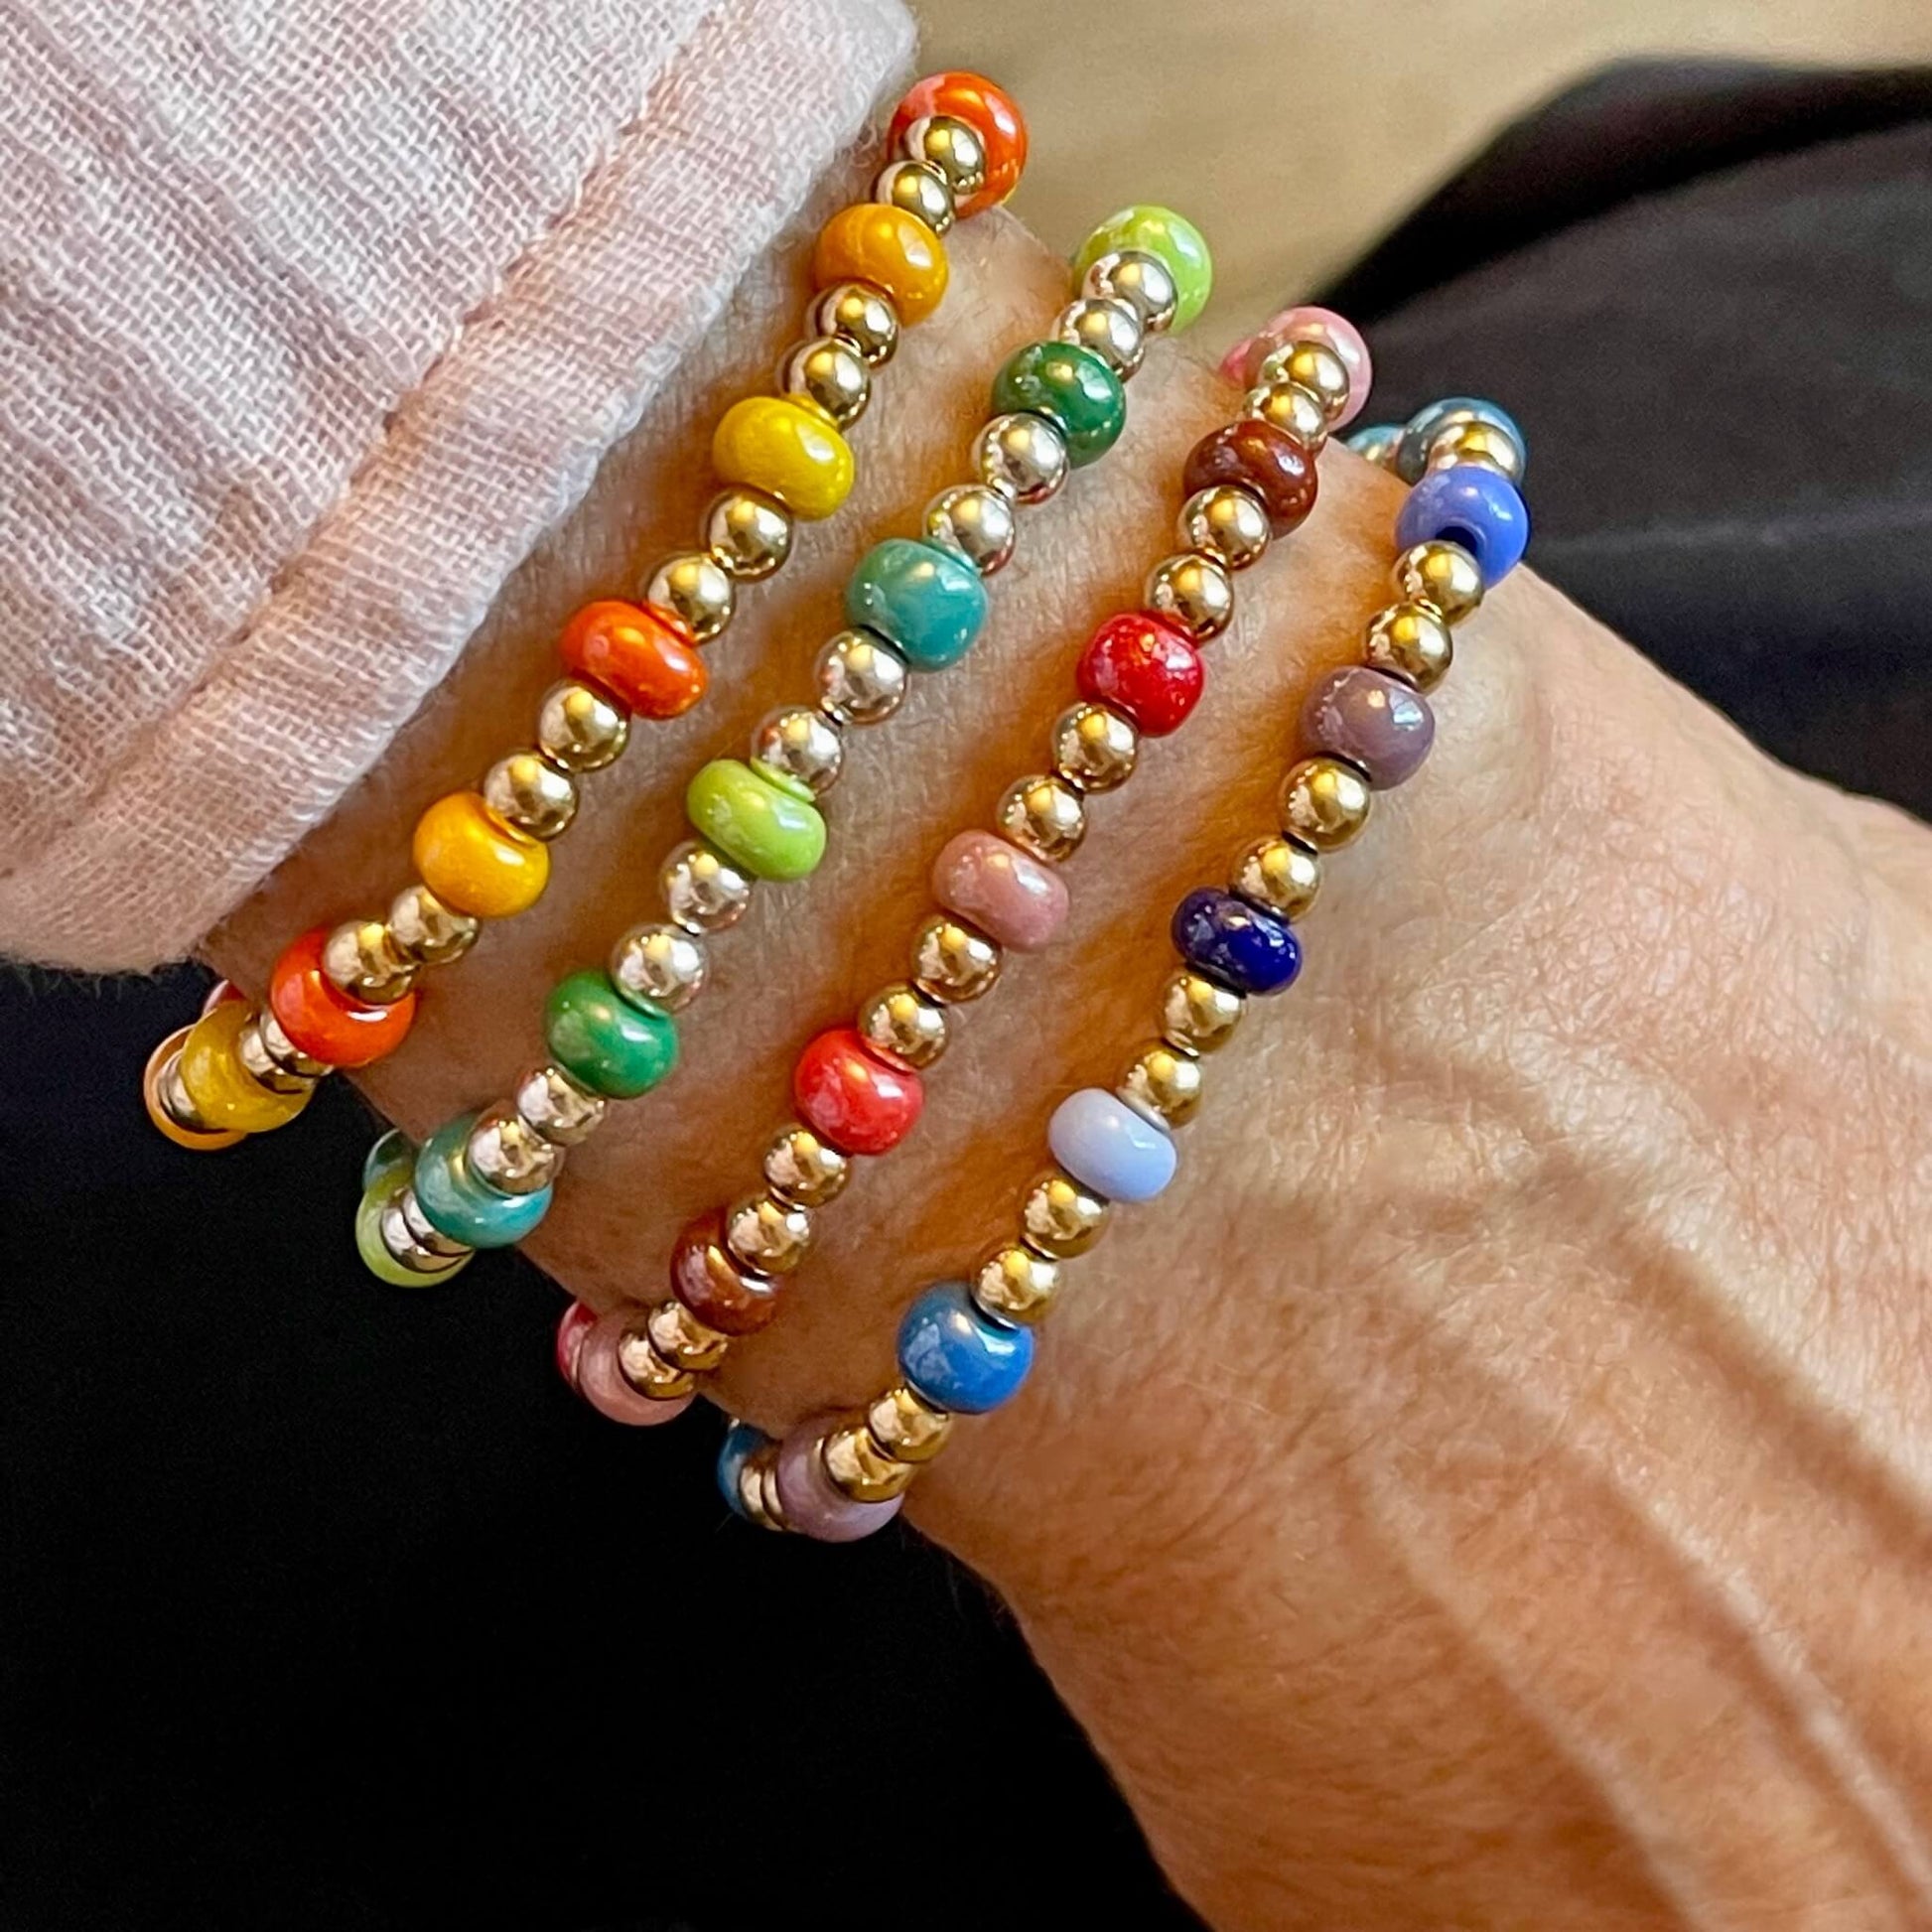 Colorful Beaded Bracelets | Large Multicolor Beads | Gold/Silver Beads Green/Teal (B) / Rose Gold / 7.5 (Women's L)